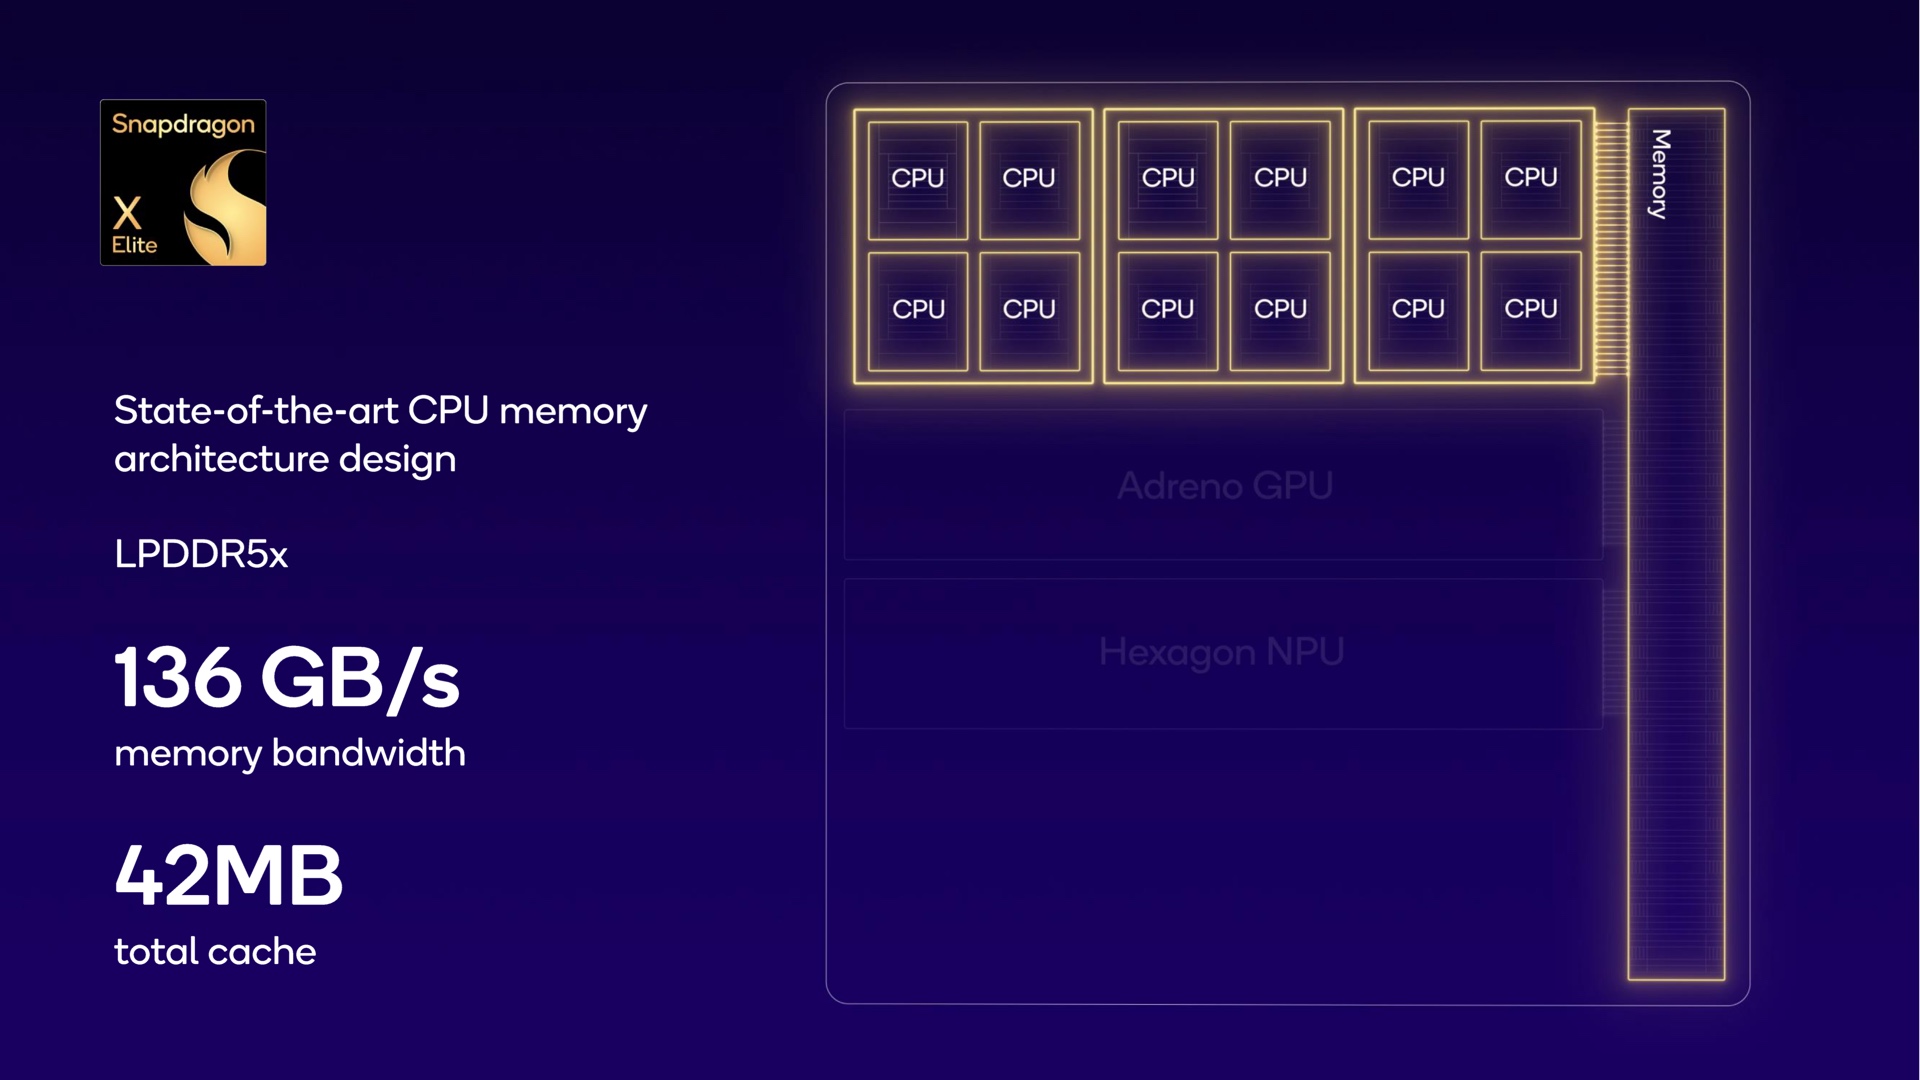  A diagram of the Qualcomm Snapdragon X Elite NPU processor, which is designed for laptops and offers state-of-the-art CPU memory architecture, 136 GB/s memory bandwidth, 42 MB total cache, and an Adreno GPU.